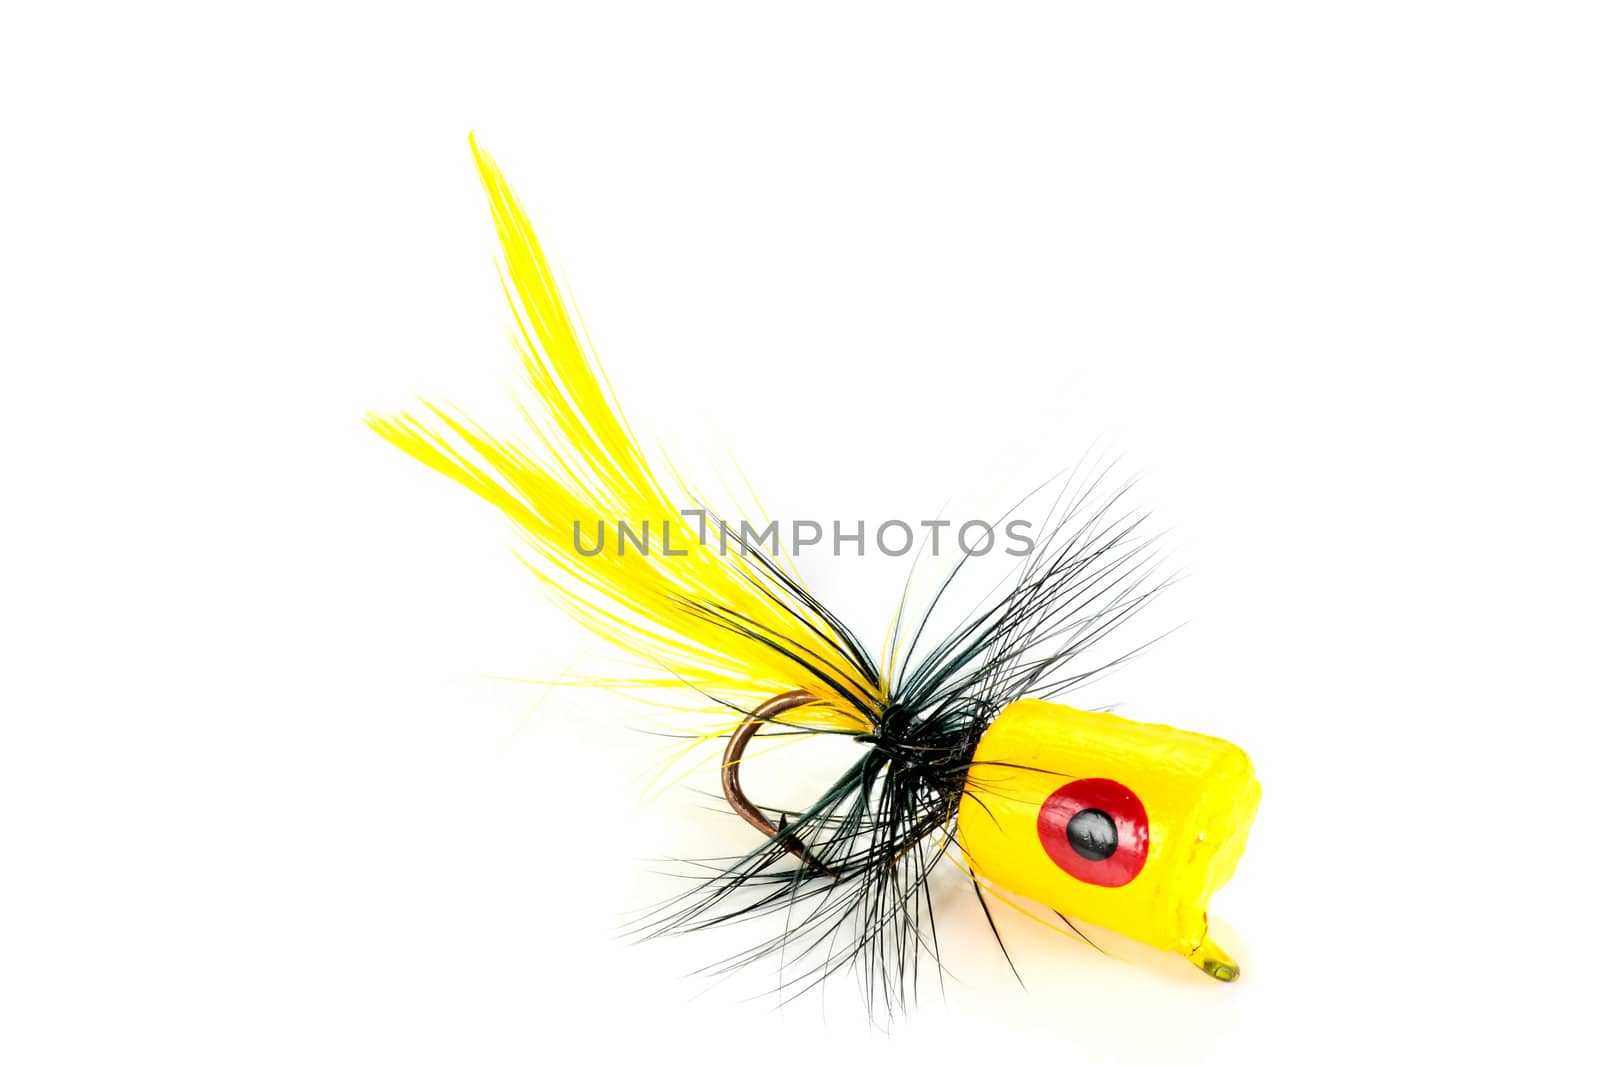 popper cork yellow and black with a hook for fishing on white background